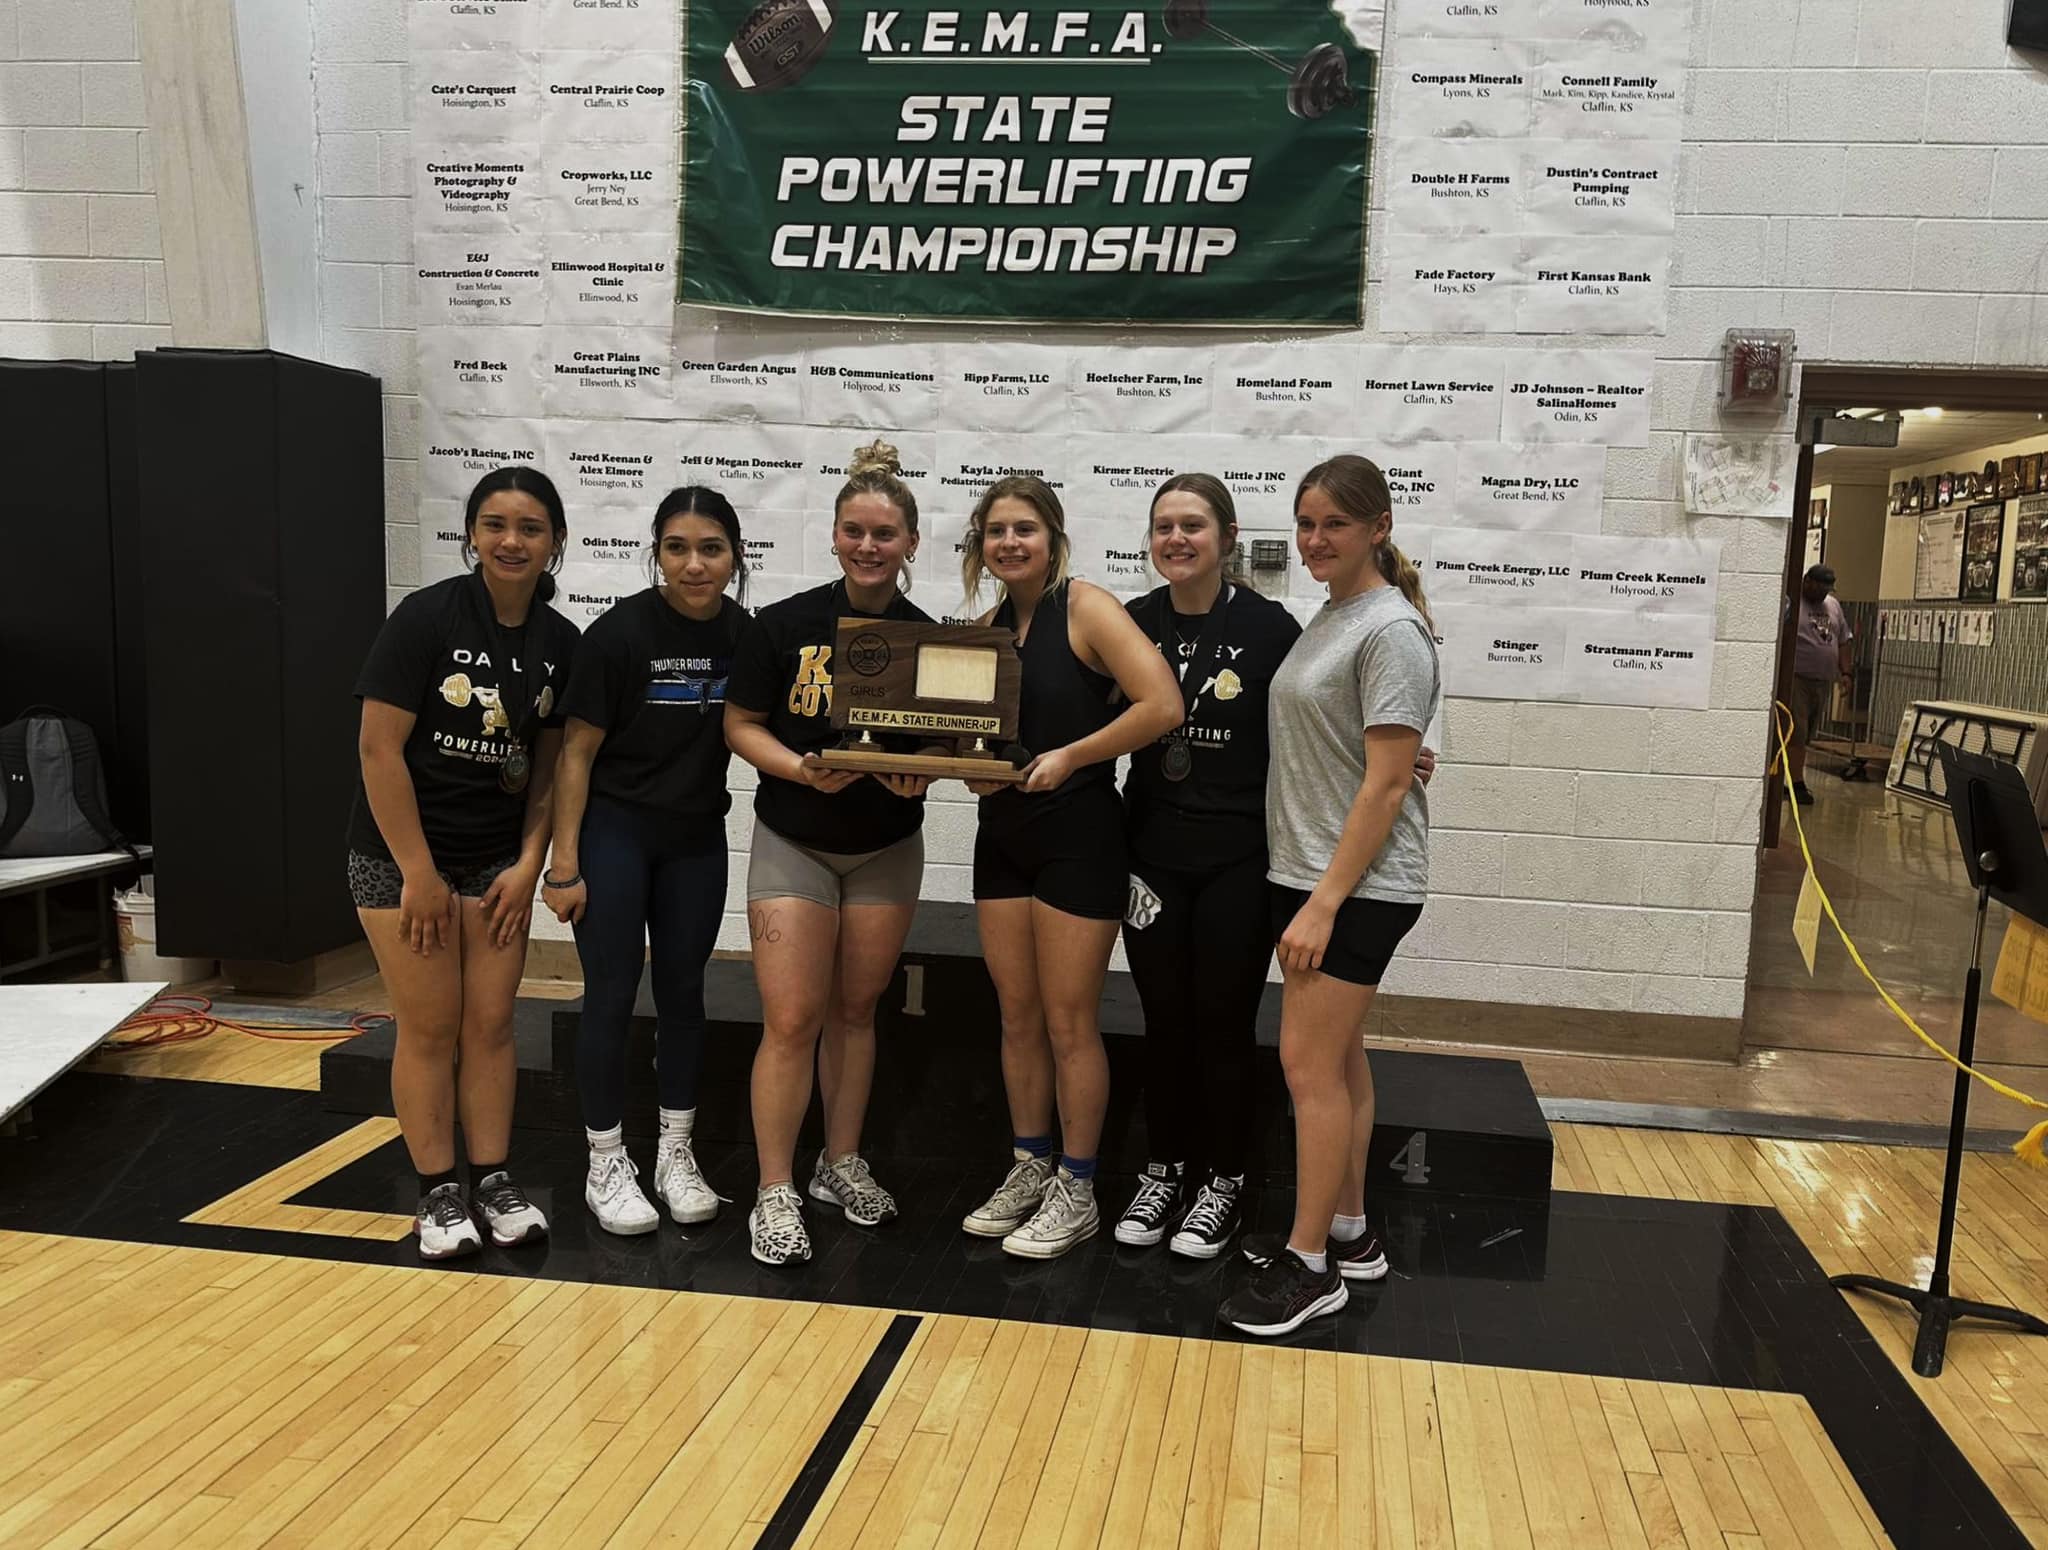 The Thunder Ridge girls powerlifting team took 2nd Place at the State Meet on Saturday, April 20.